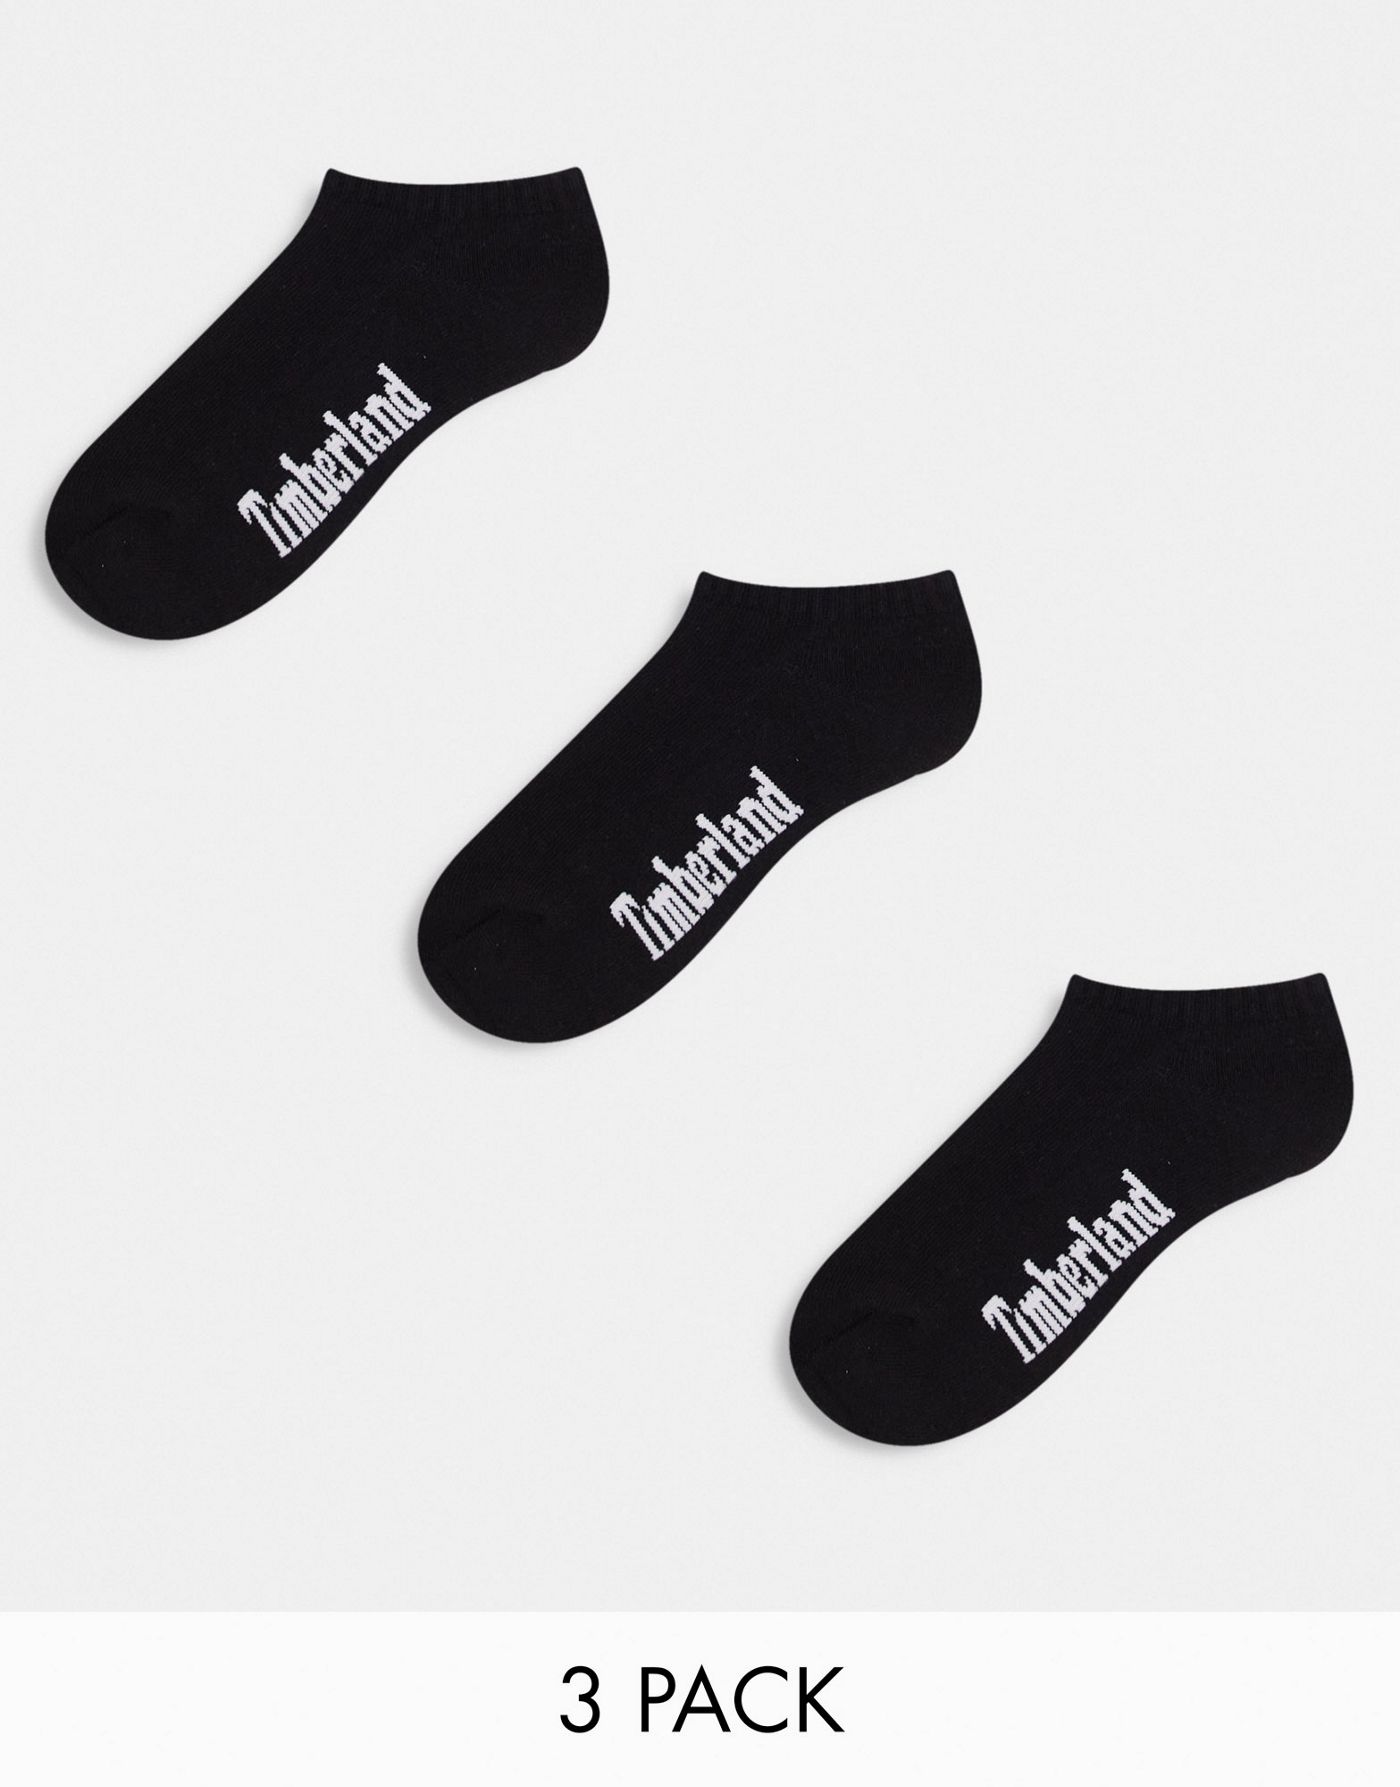 Timberland 3 pack no show socks in black